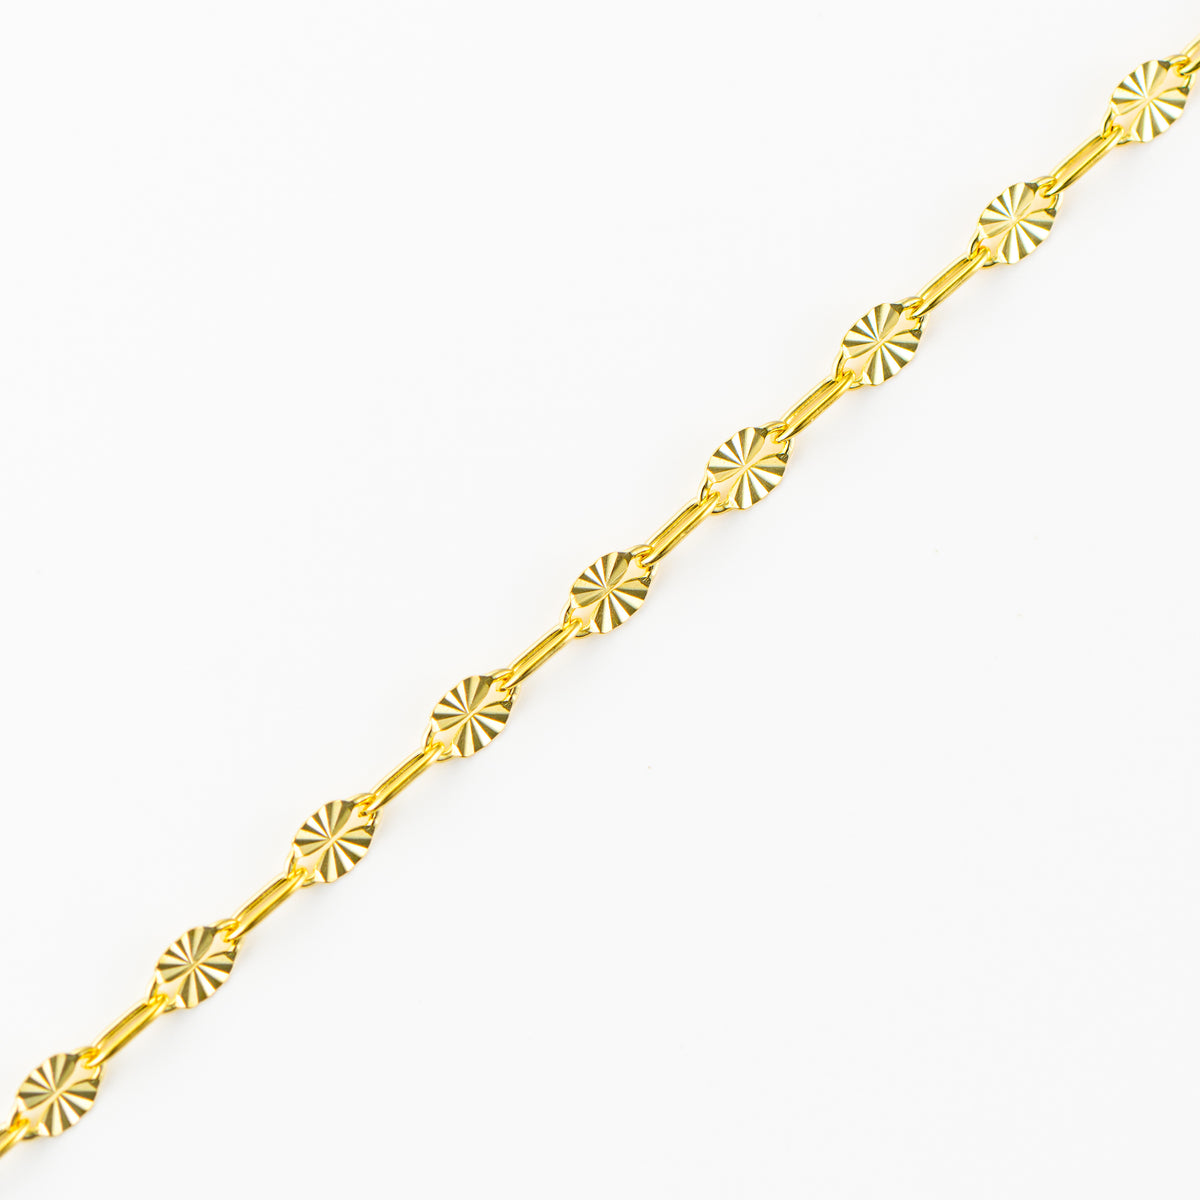 Fine silver chain necklace, gold plated